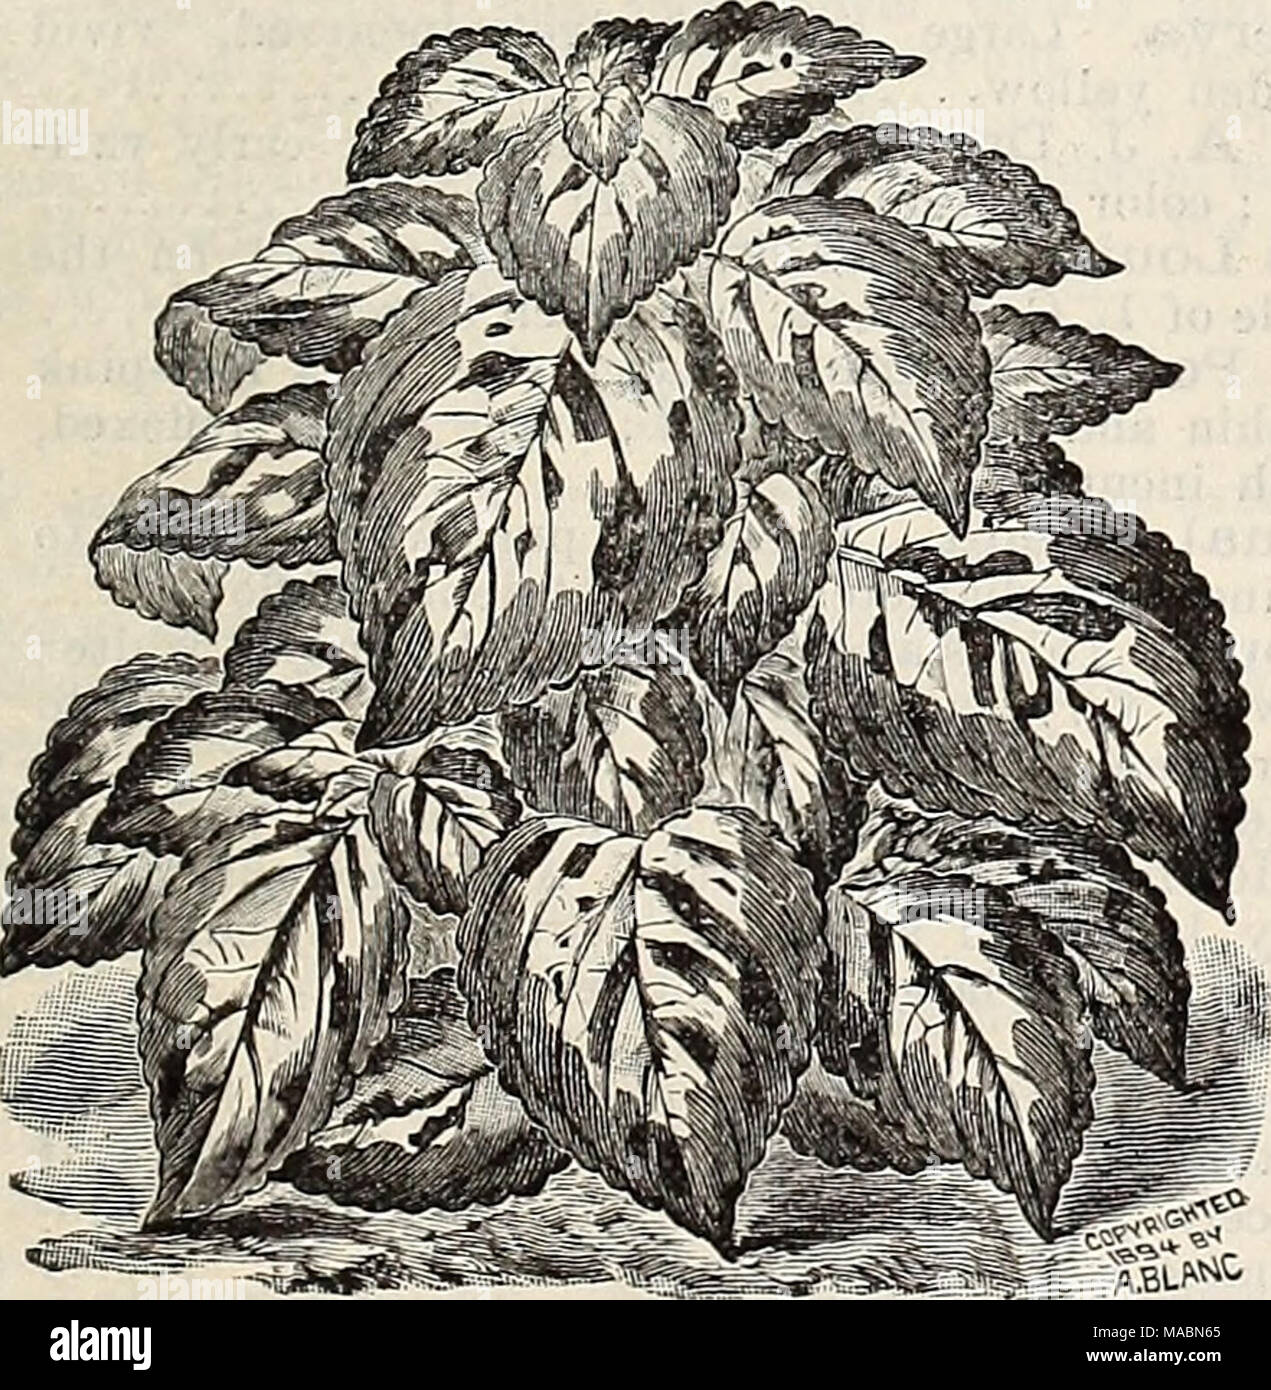 . Dreer's quarterly wholesale price list of seeds, plants &amp;c. : winter edition January 1896 March . B§tHR5ABi.w4&amp; New Coleus, Mrs. F. Sander. Coleus, Mrs. F. Sander. This splendid new Coleus differs from all other varieties in having a wedge of creamy white in the centre of the leaf, with a clearly defined margin of oxide green, bronze, crimson and purple. It is the most beautiful and distinct variety yet raised. 75 cents per dozen ; $5.00 per 100. Crotons. We offer 10 choice varieties. $10.00 per 100; set of 10 for $1.50. Carex Japonica Variegata. A pretty, new ornamental sedge, with  Stock Photo